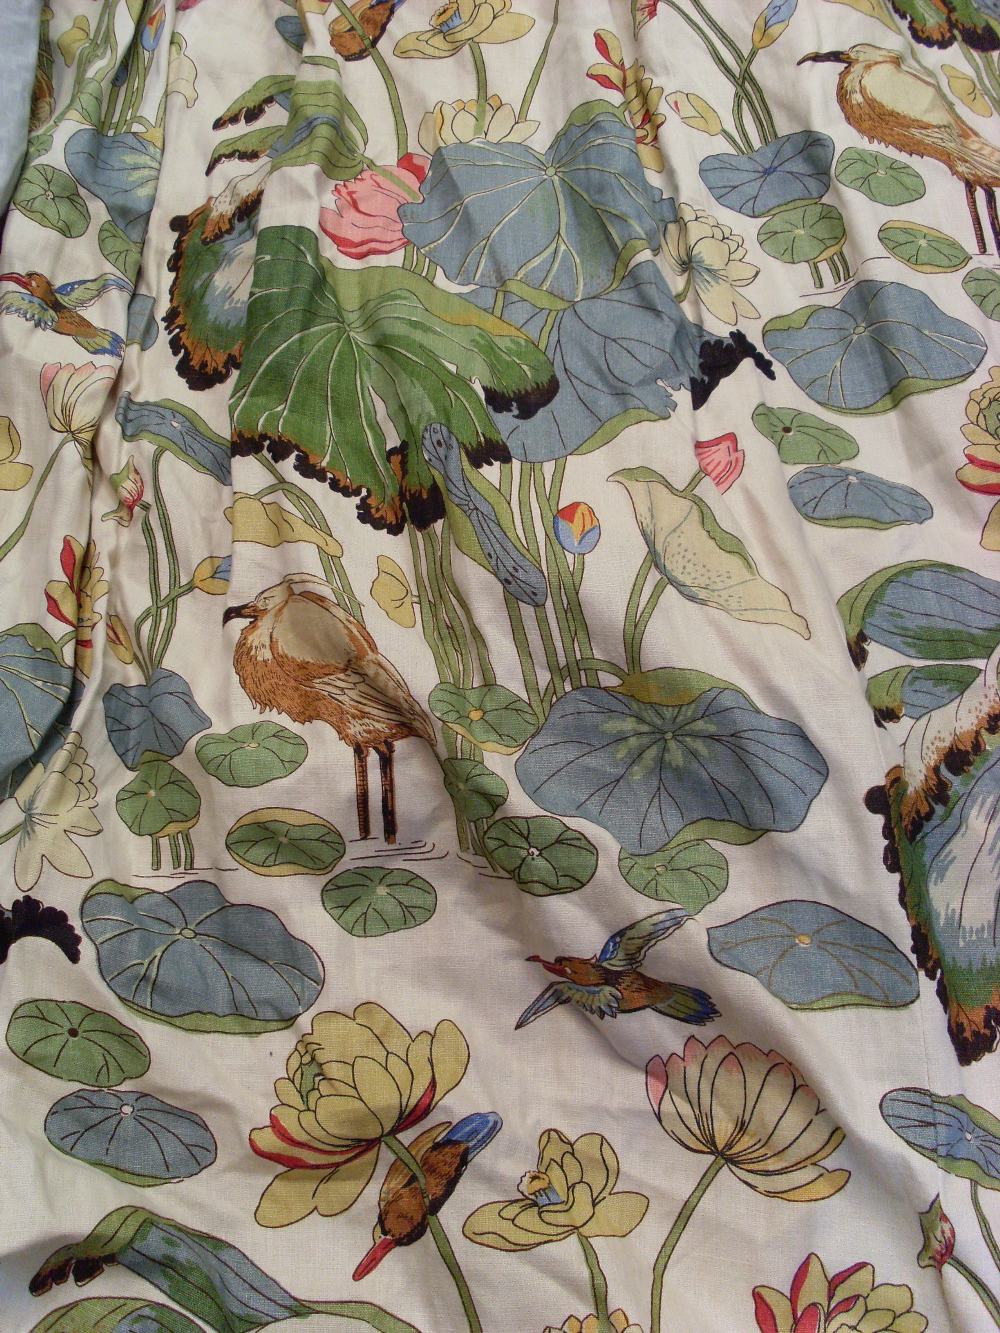 Pair of water lily and flamingo printed linen union curtains, pelmets and tie-backs, 120in wide x